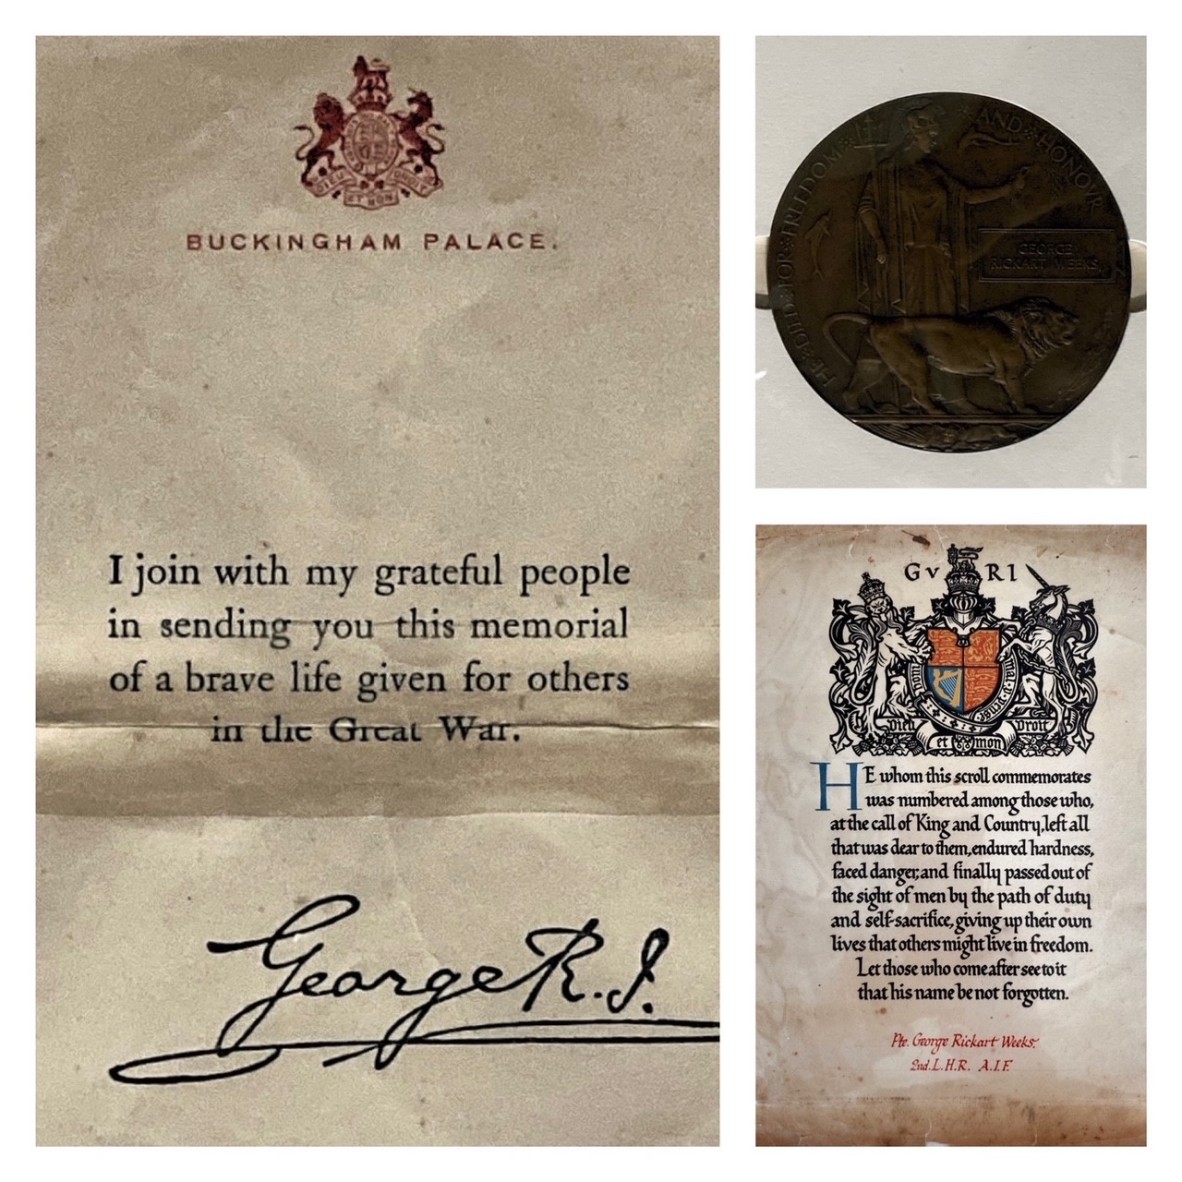 Clockwise from left, Letter from Buckingham Palace accompanying the Memorial Plaque, the Memorial Plaque and the Memorial Scroll.